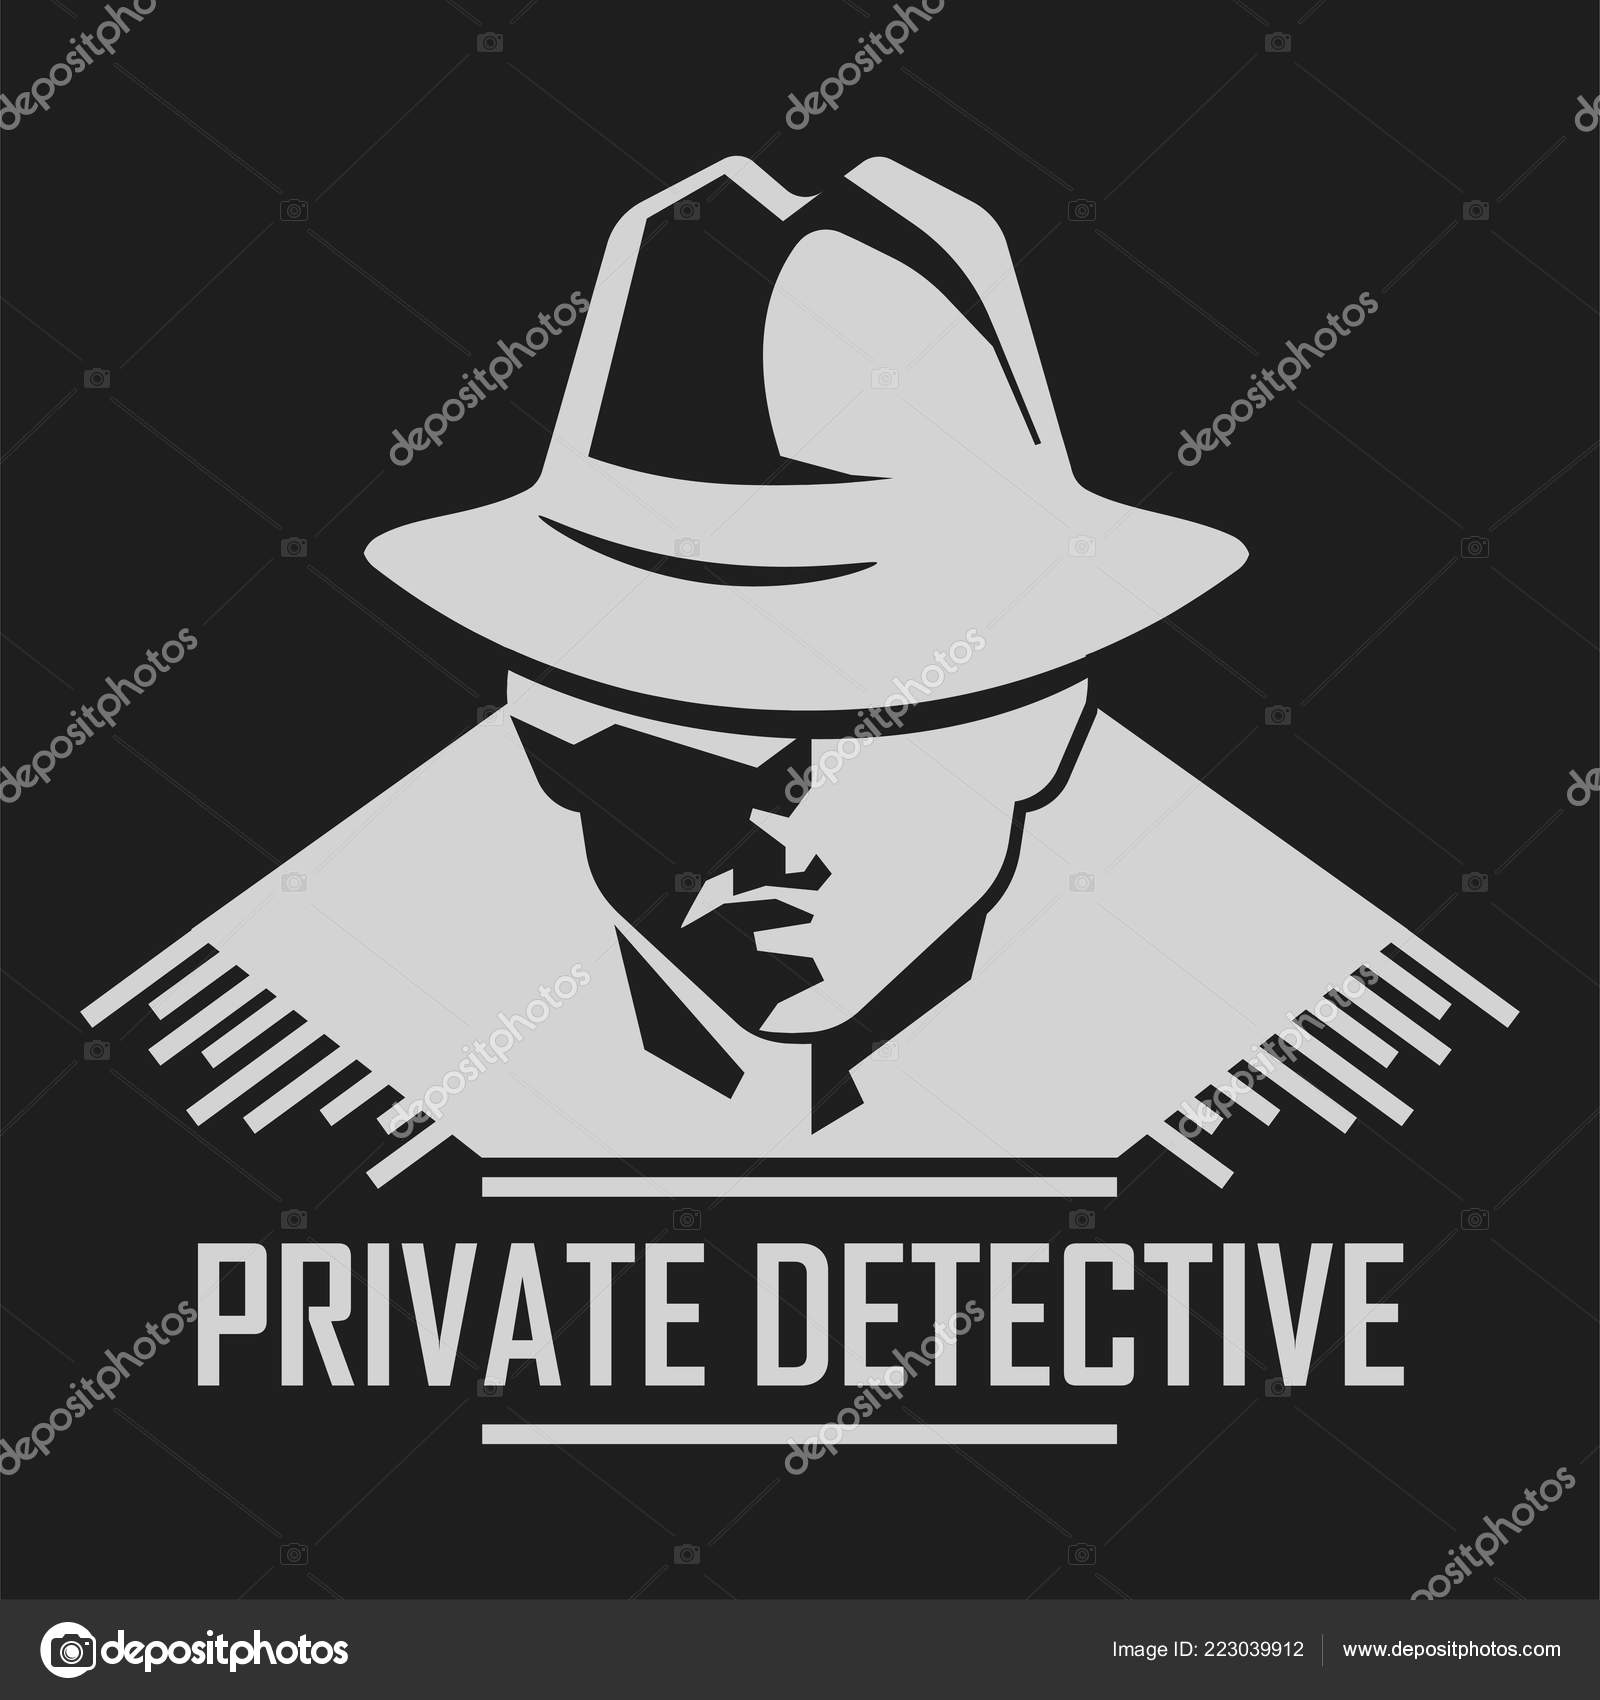 WHAT SHOULD YOU LOOK FOR WHEN HIRING  A PRIVATE INVESTIGATOR